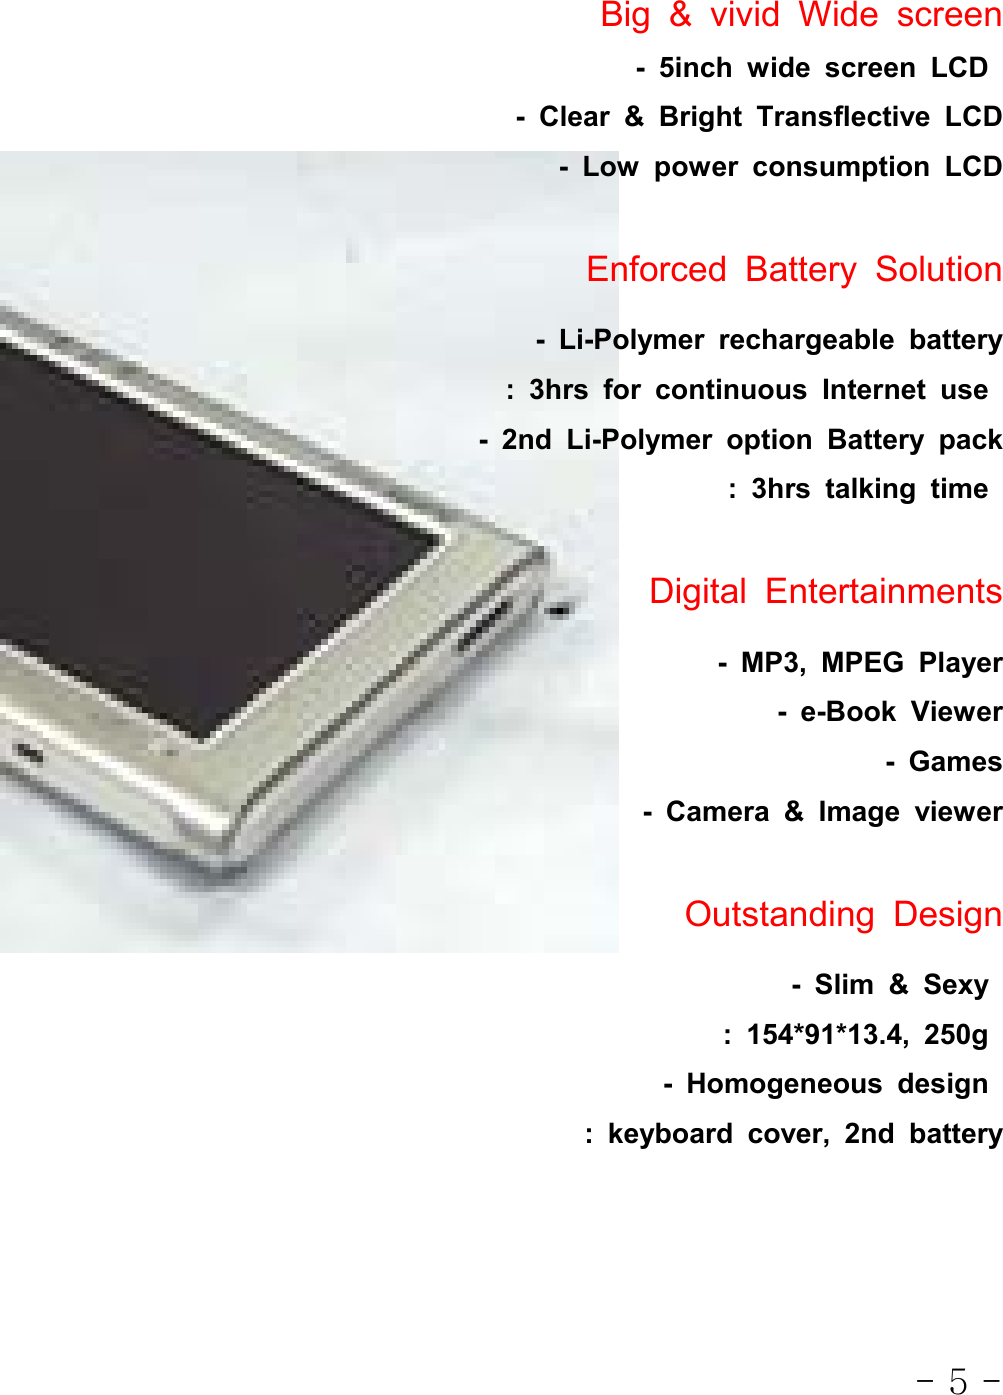 - 5 -Big&amp;vividWidescreen- 5inch wide screen LCD- Clear &amp; Bright Transflective LCD- Low power consumption LCDEnforced Battery Solution- Li-Polymer rechargeable battery: 3hrs for continuous Internet use- 2nd Li-Polymer option Battery pack: 3hrs talking timeDigital Entertainments- MP3, MPEG Player-e-BookViewer- Games- Camera &amp; Image viewerOutstanding Design- Slim &amp; Sexy: 154*91*13.4, 250g- Homogeneous design: keyboard cover, 2nd battery